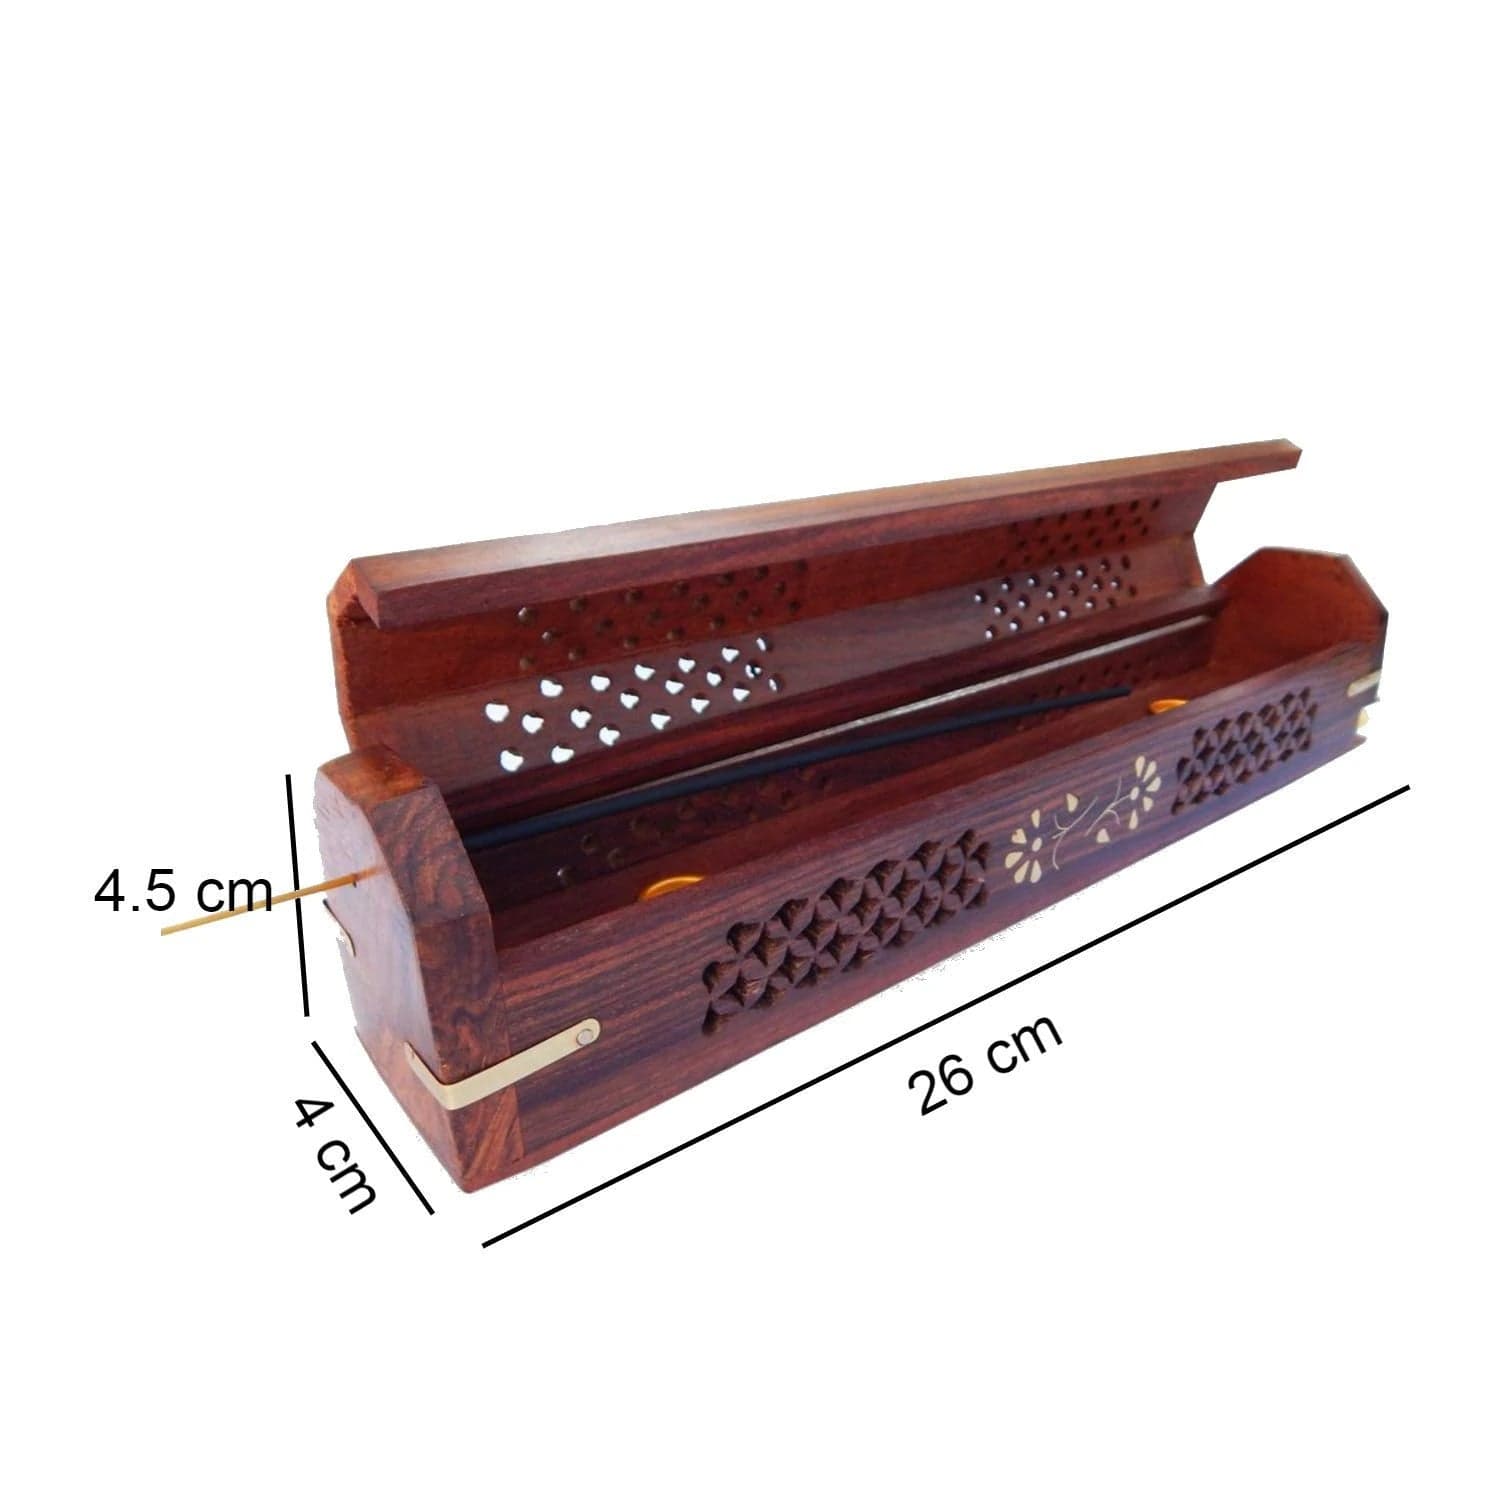 SHEESHAM WOODEN INCENSE STICK HOLDER AND DHOOP BATTI STAND FROM